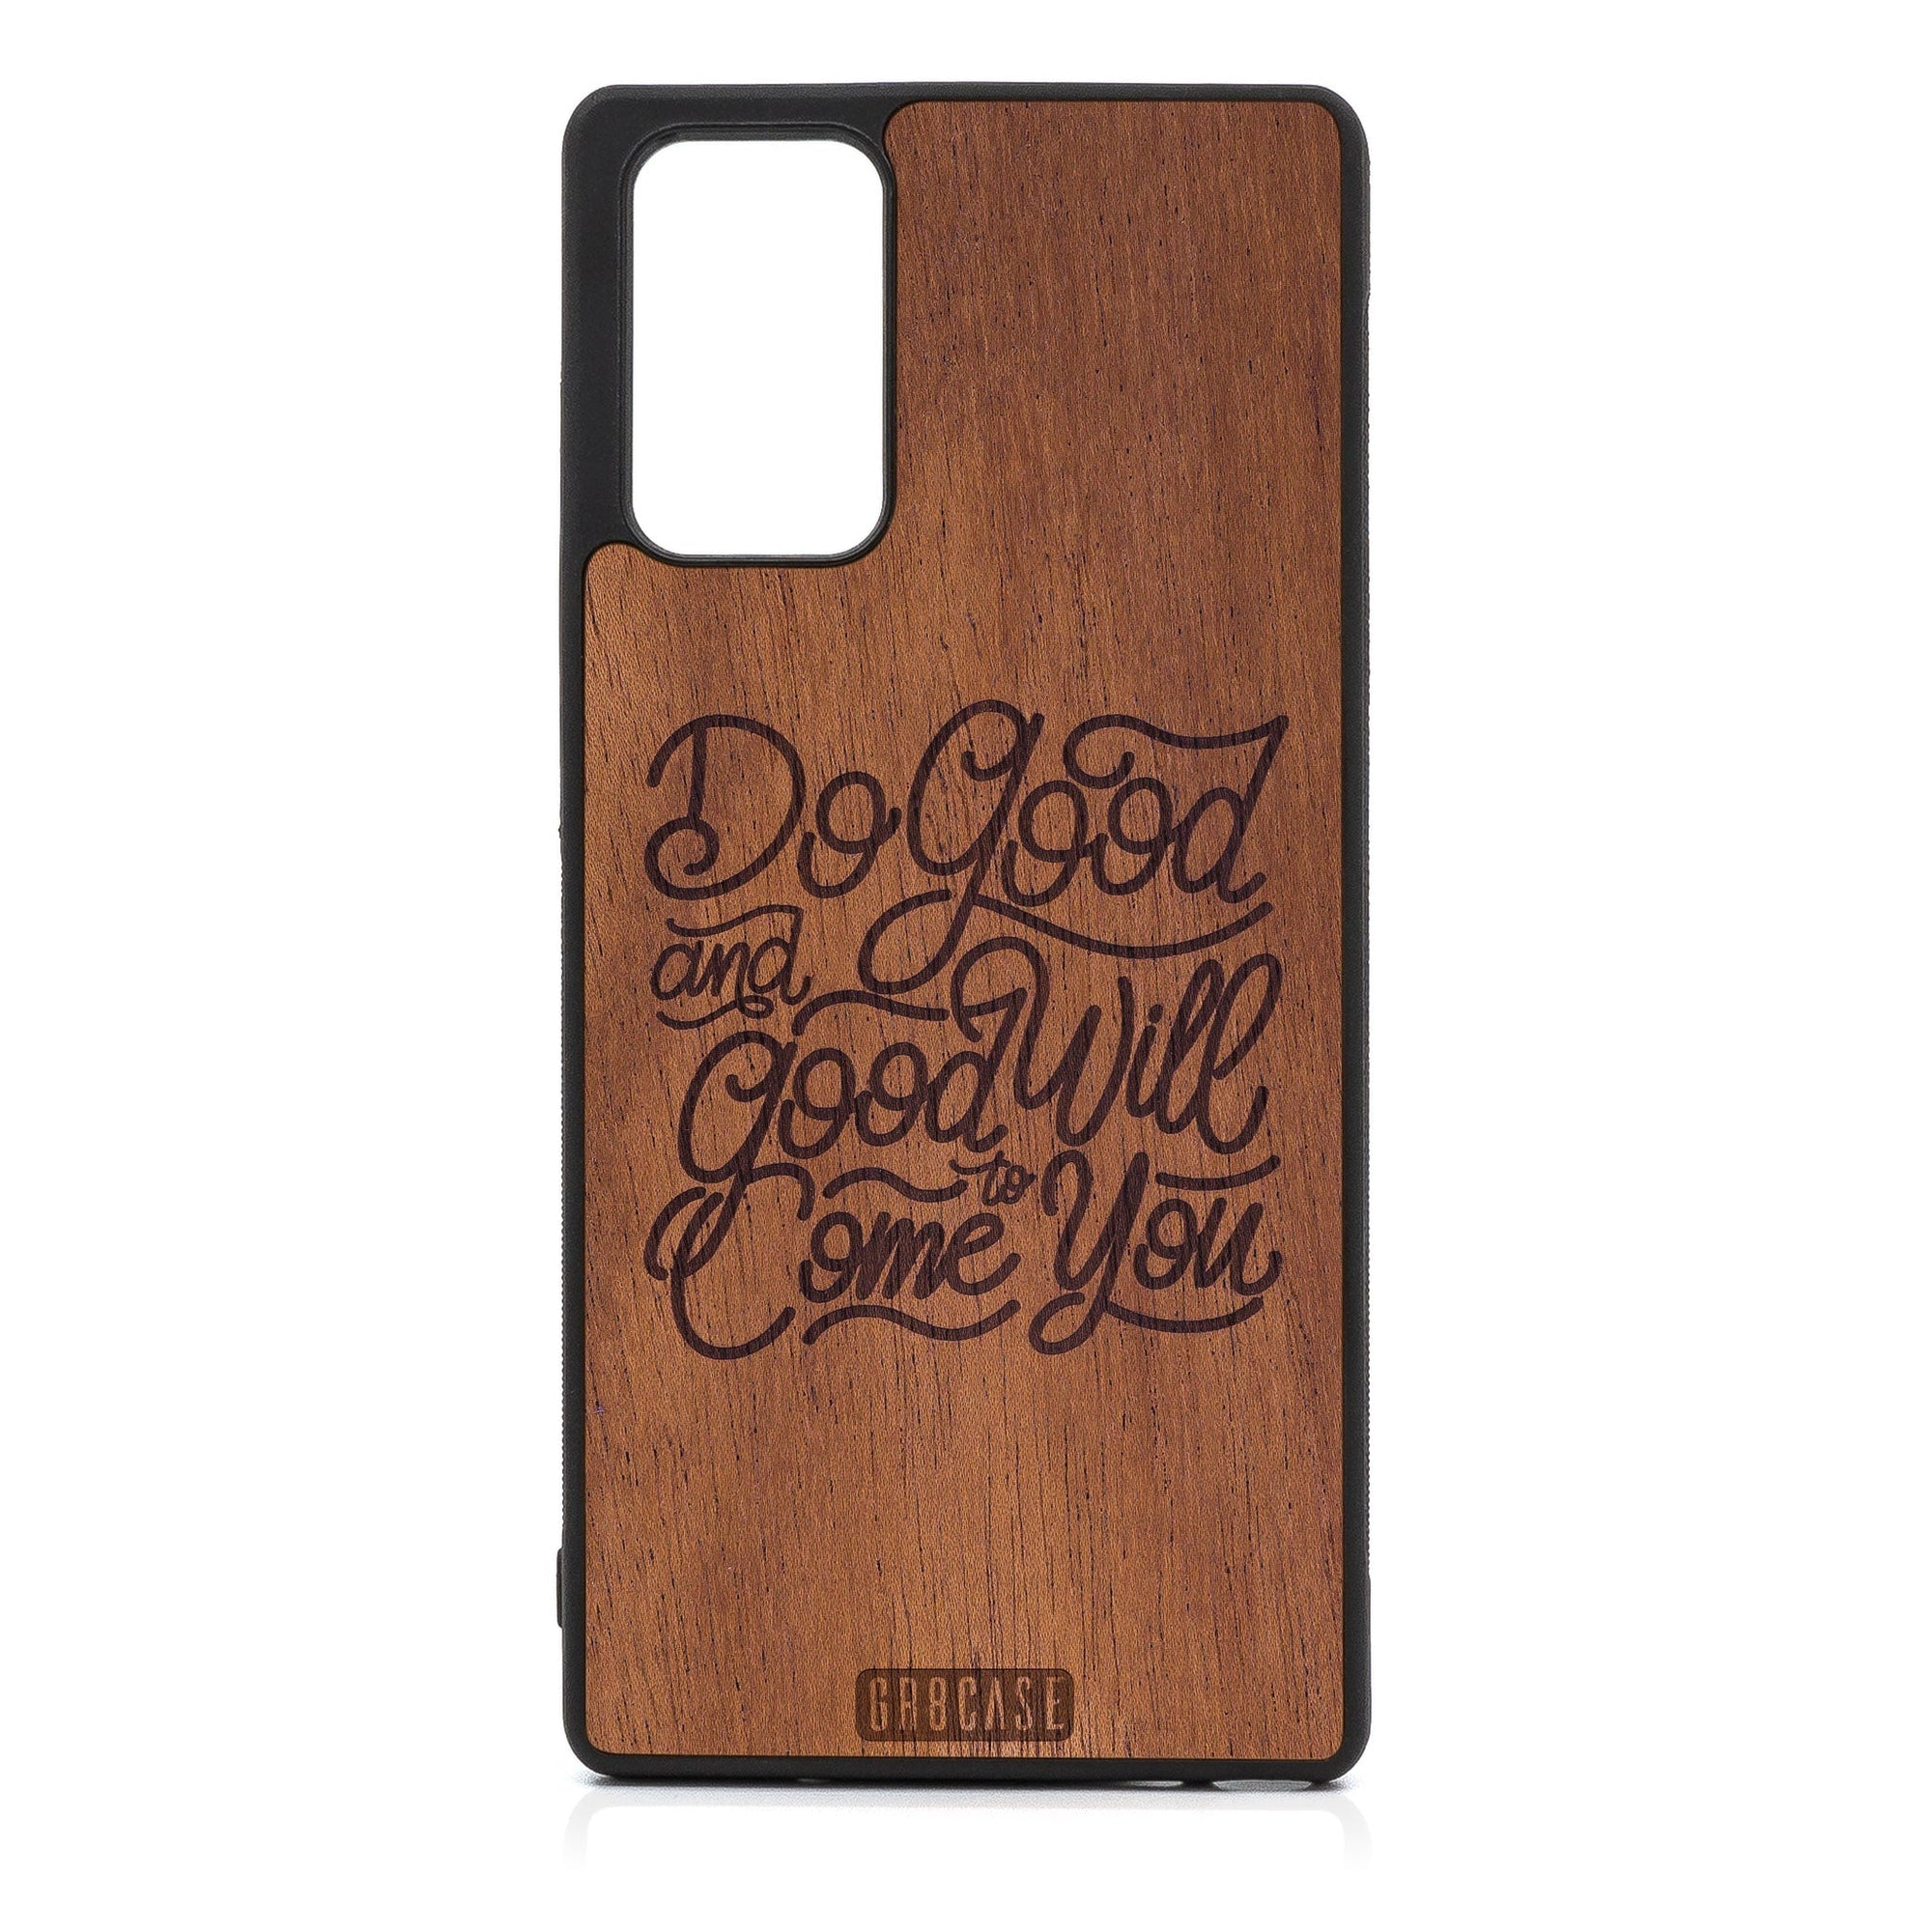 Do Good And Good Will Come To You Design Wood Case For Samsung Galaxy A72 5G